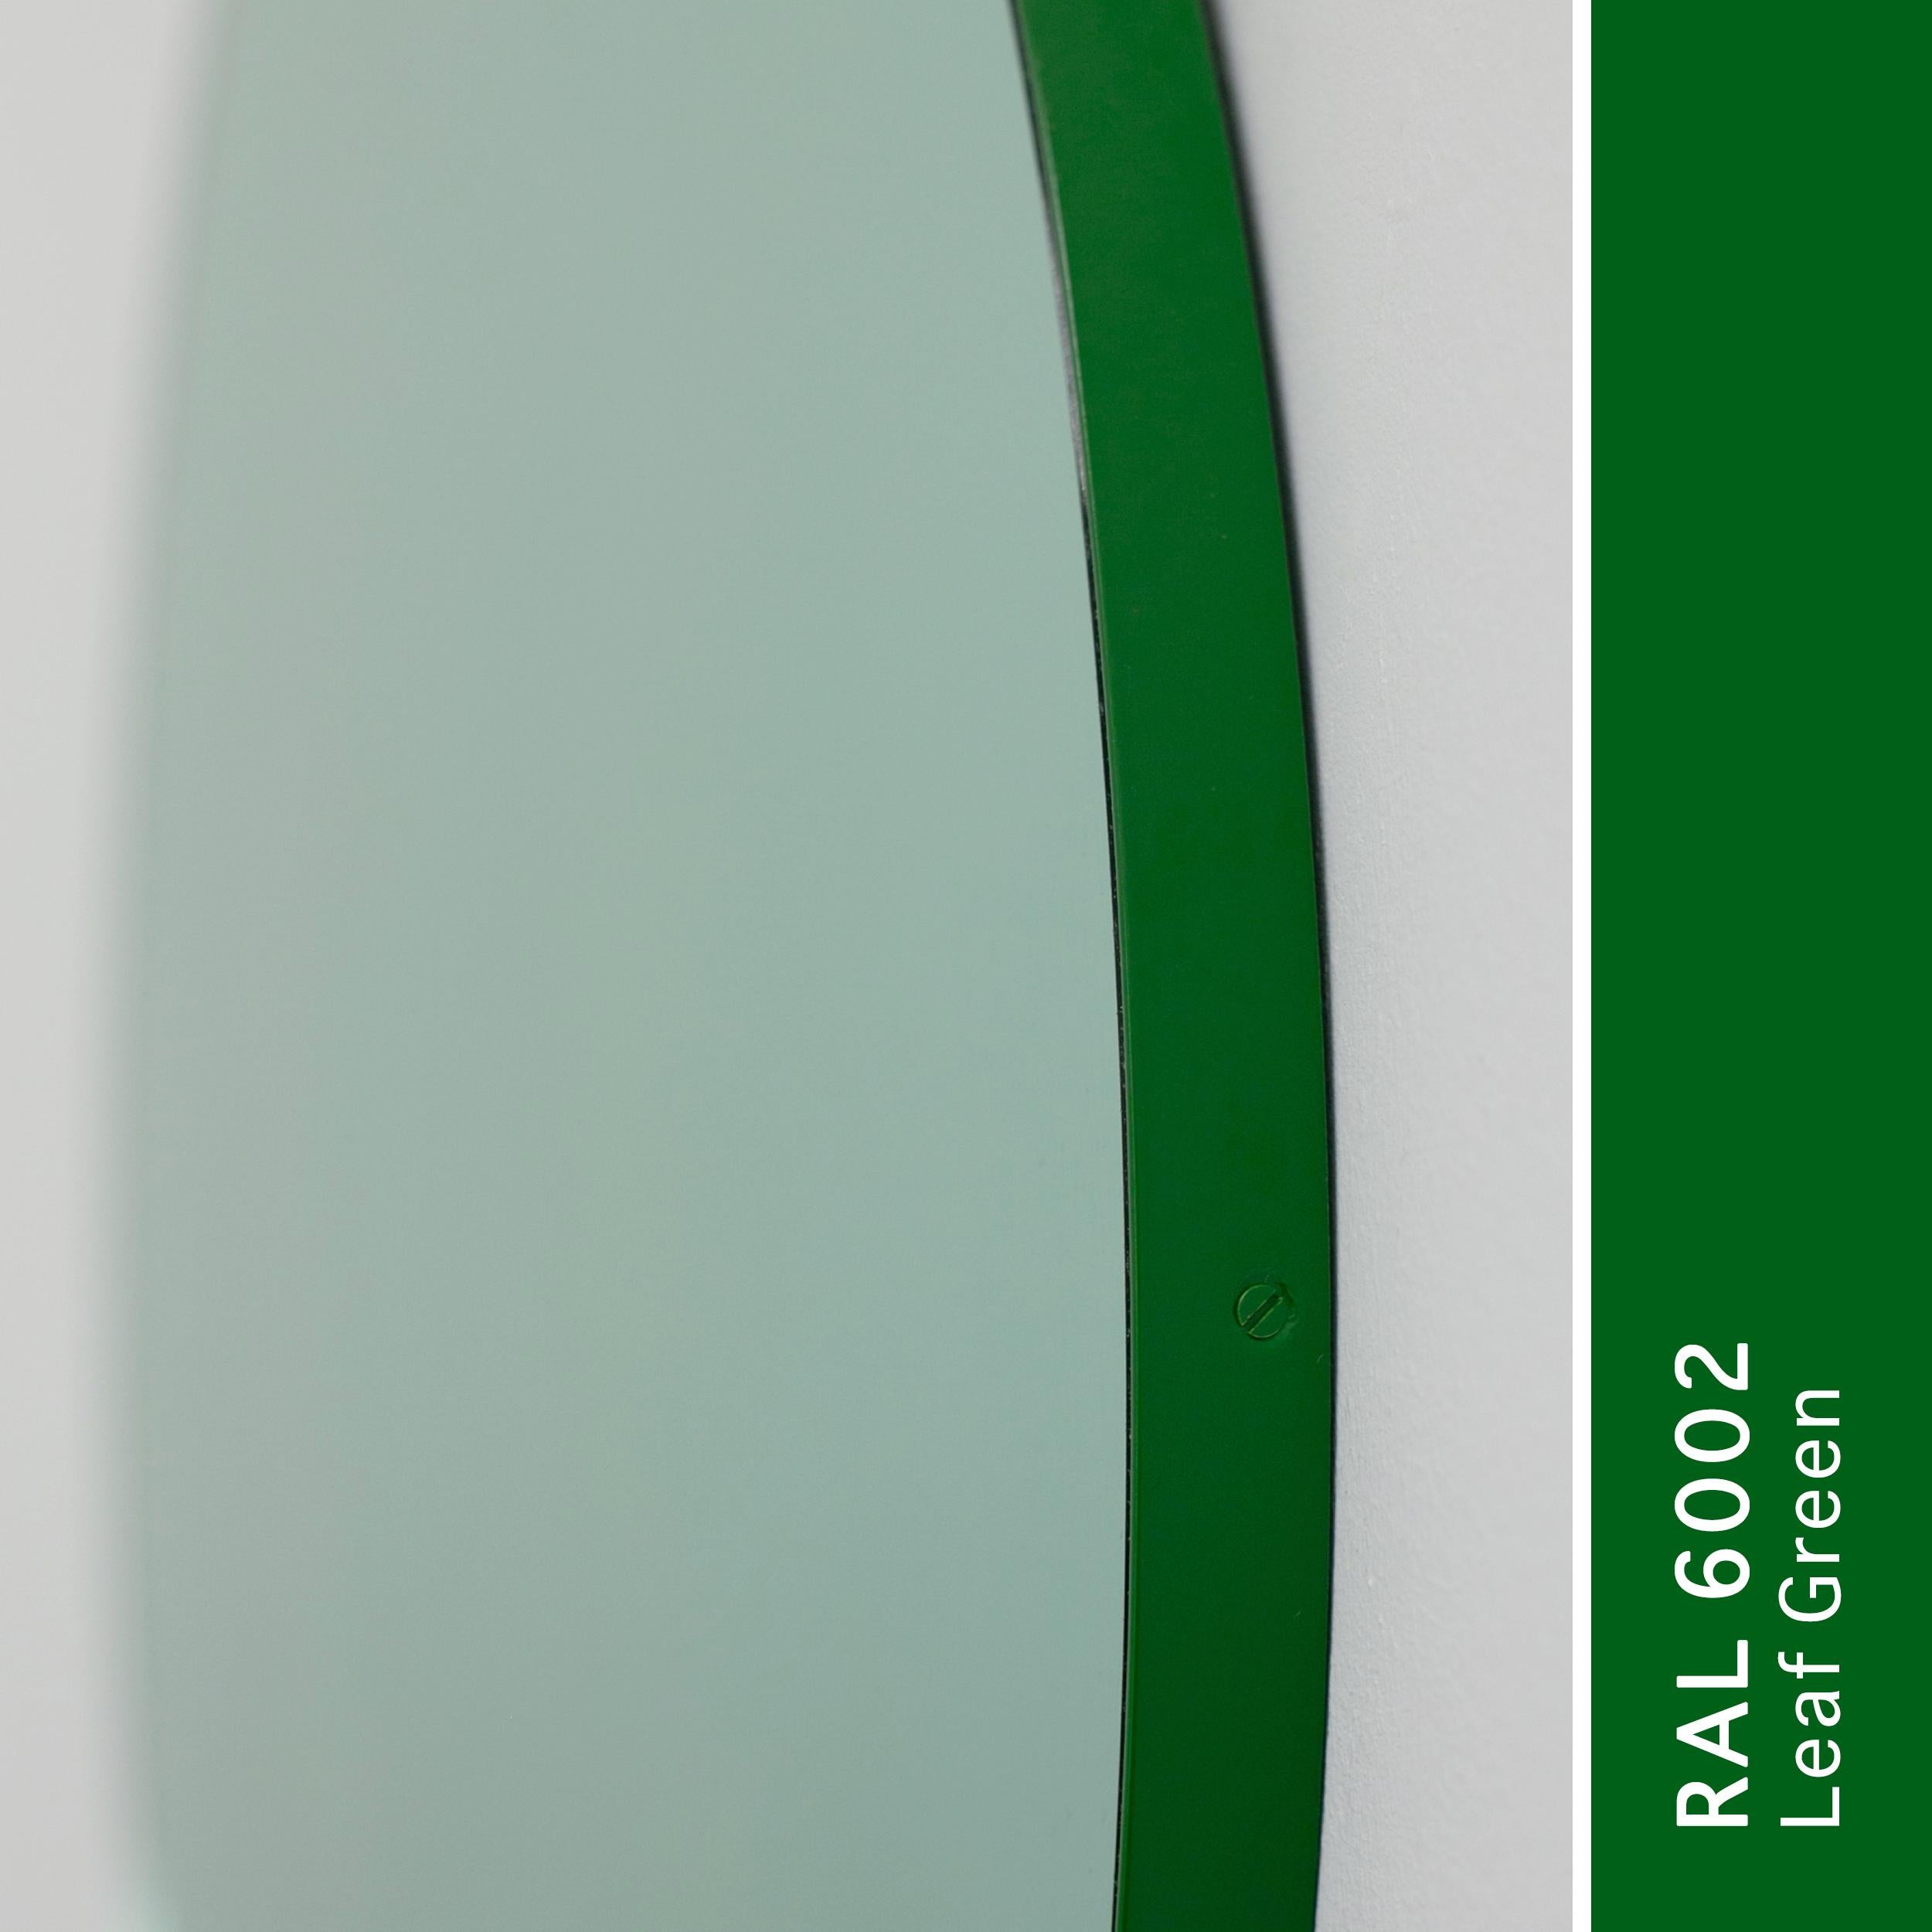 Orbis Green Tinted Modern Round Mirror with Green Frame, Small 2